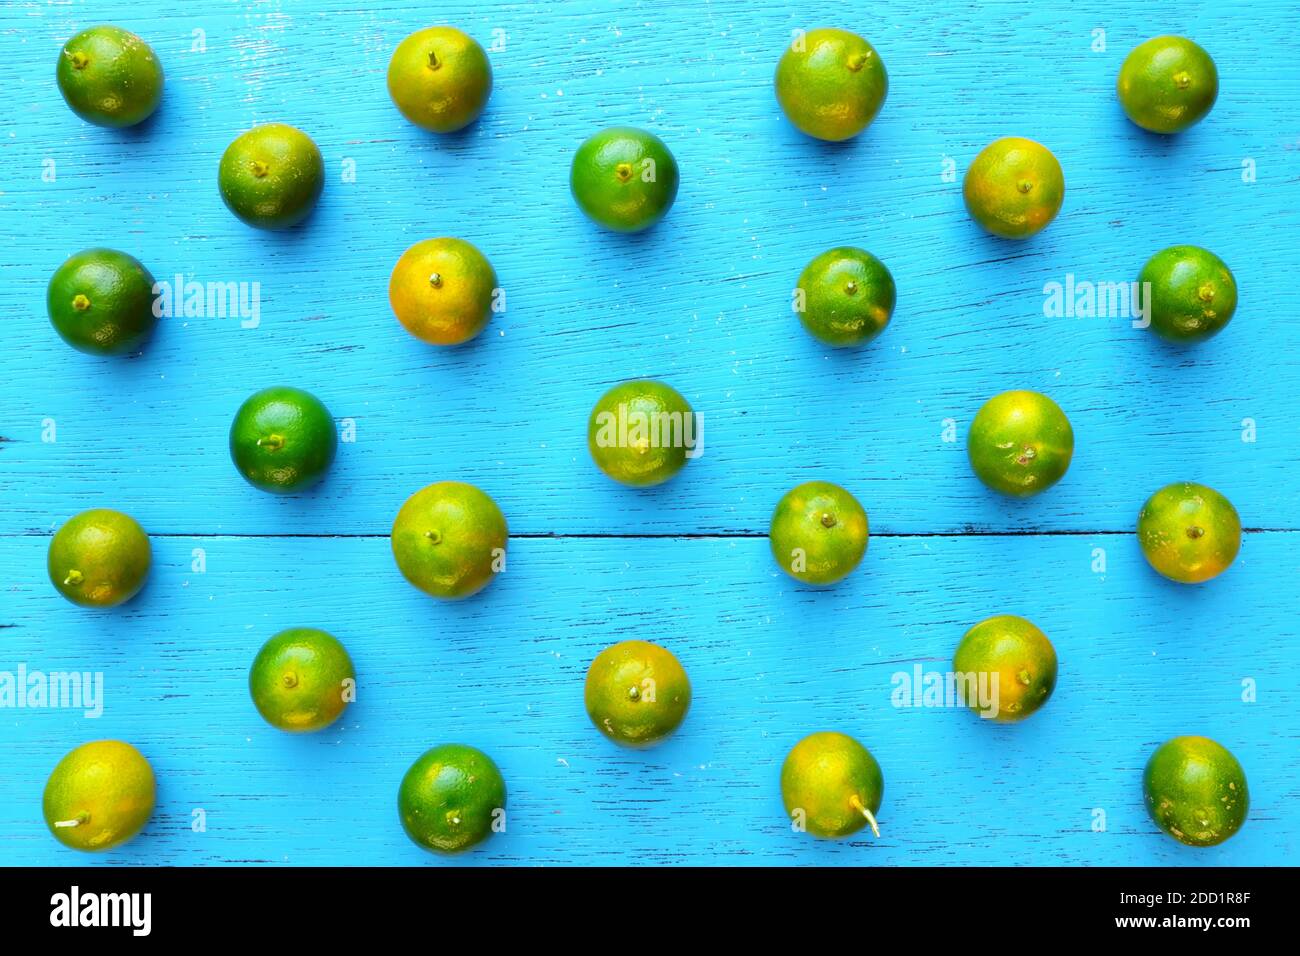 Yellow green calamansi, calamondin or philippine lime tropical fruit pattern in bright blue wood background. Asian summer citrus fruits flat lay. Stock Photo